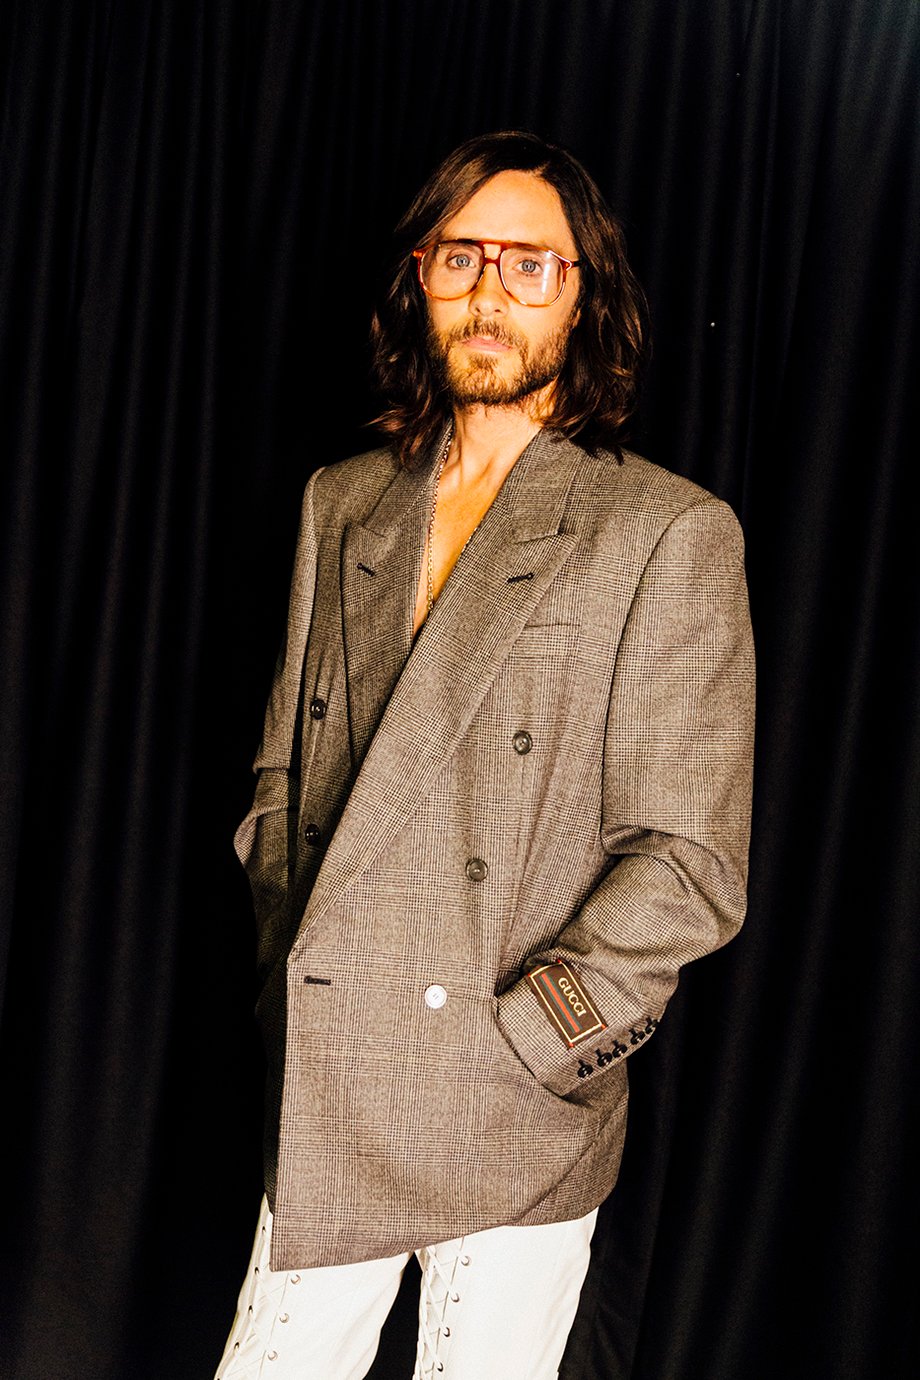 Jared Leto from Gucci show at TLC Chinese Theatre shot by Emily Malan for Vogue.